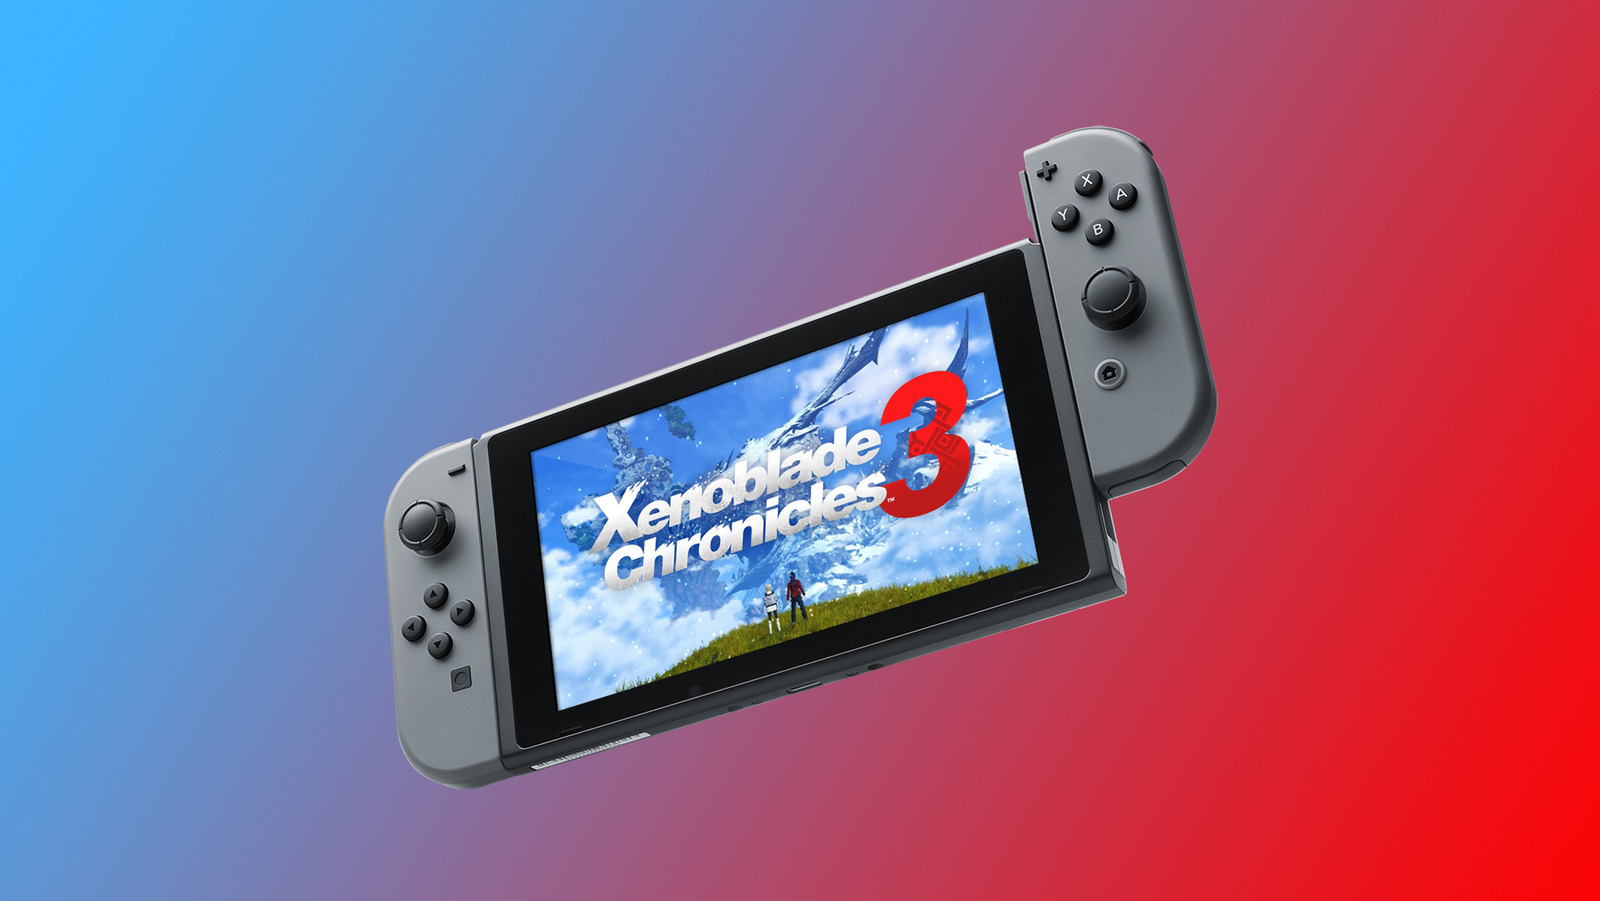 Xenoblade Chronicles 3 – Out now! (Nintendo Switch) 